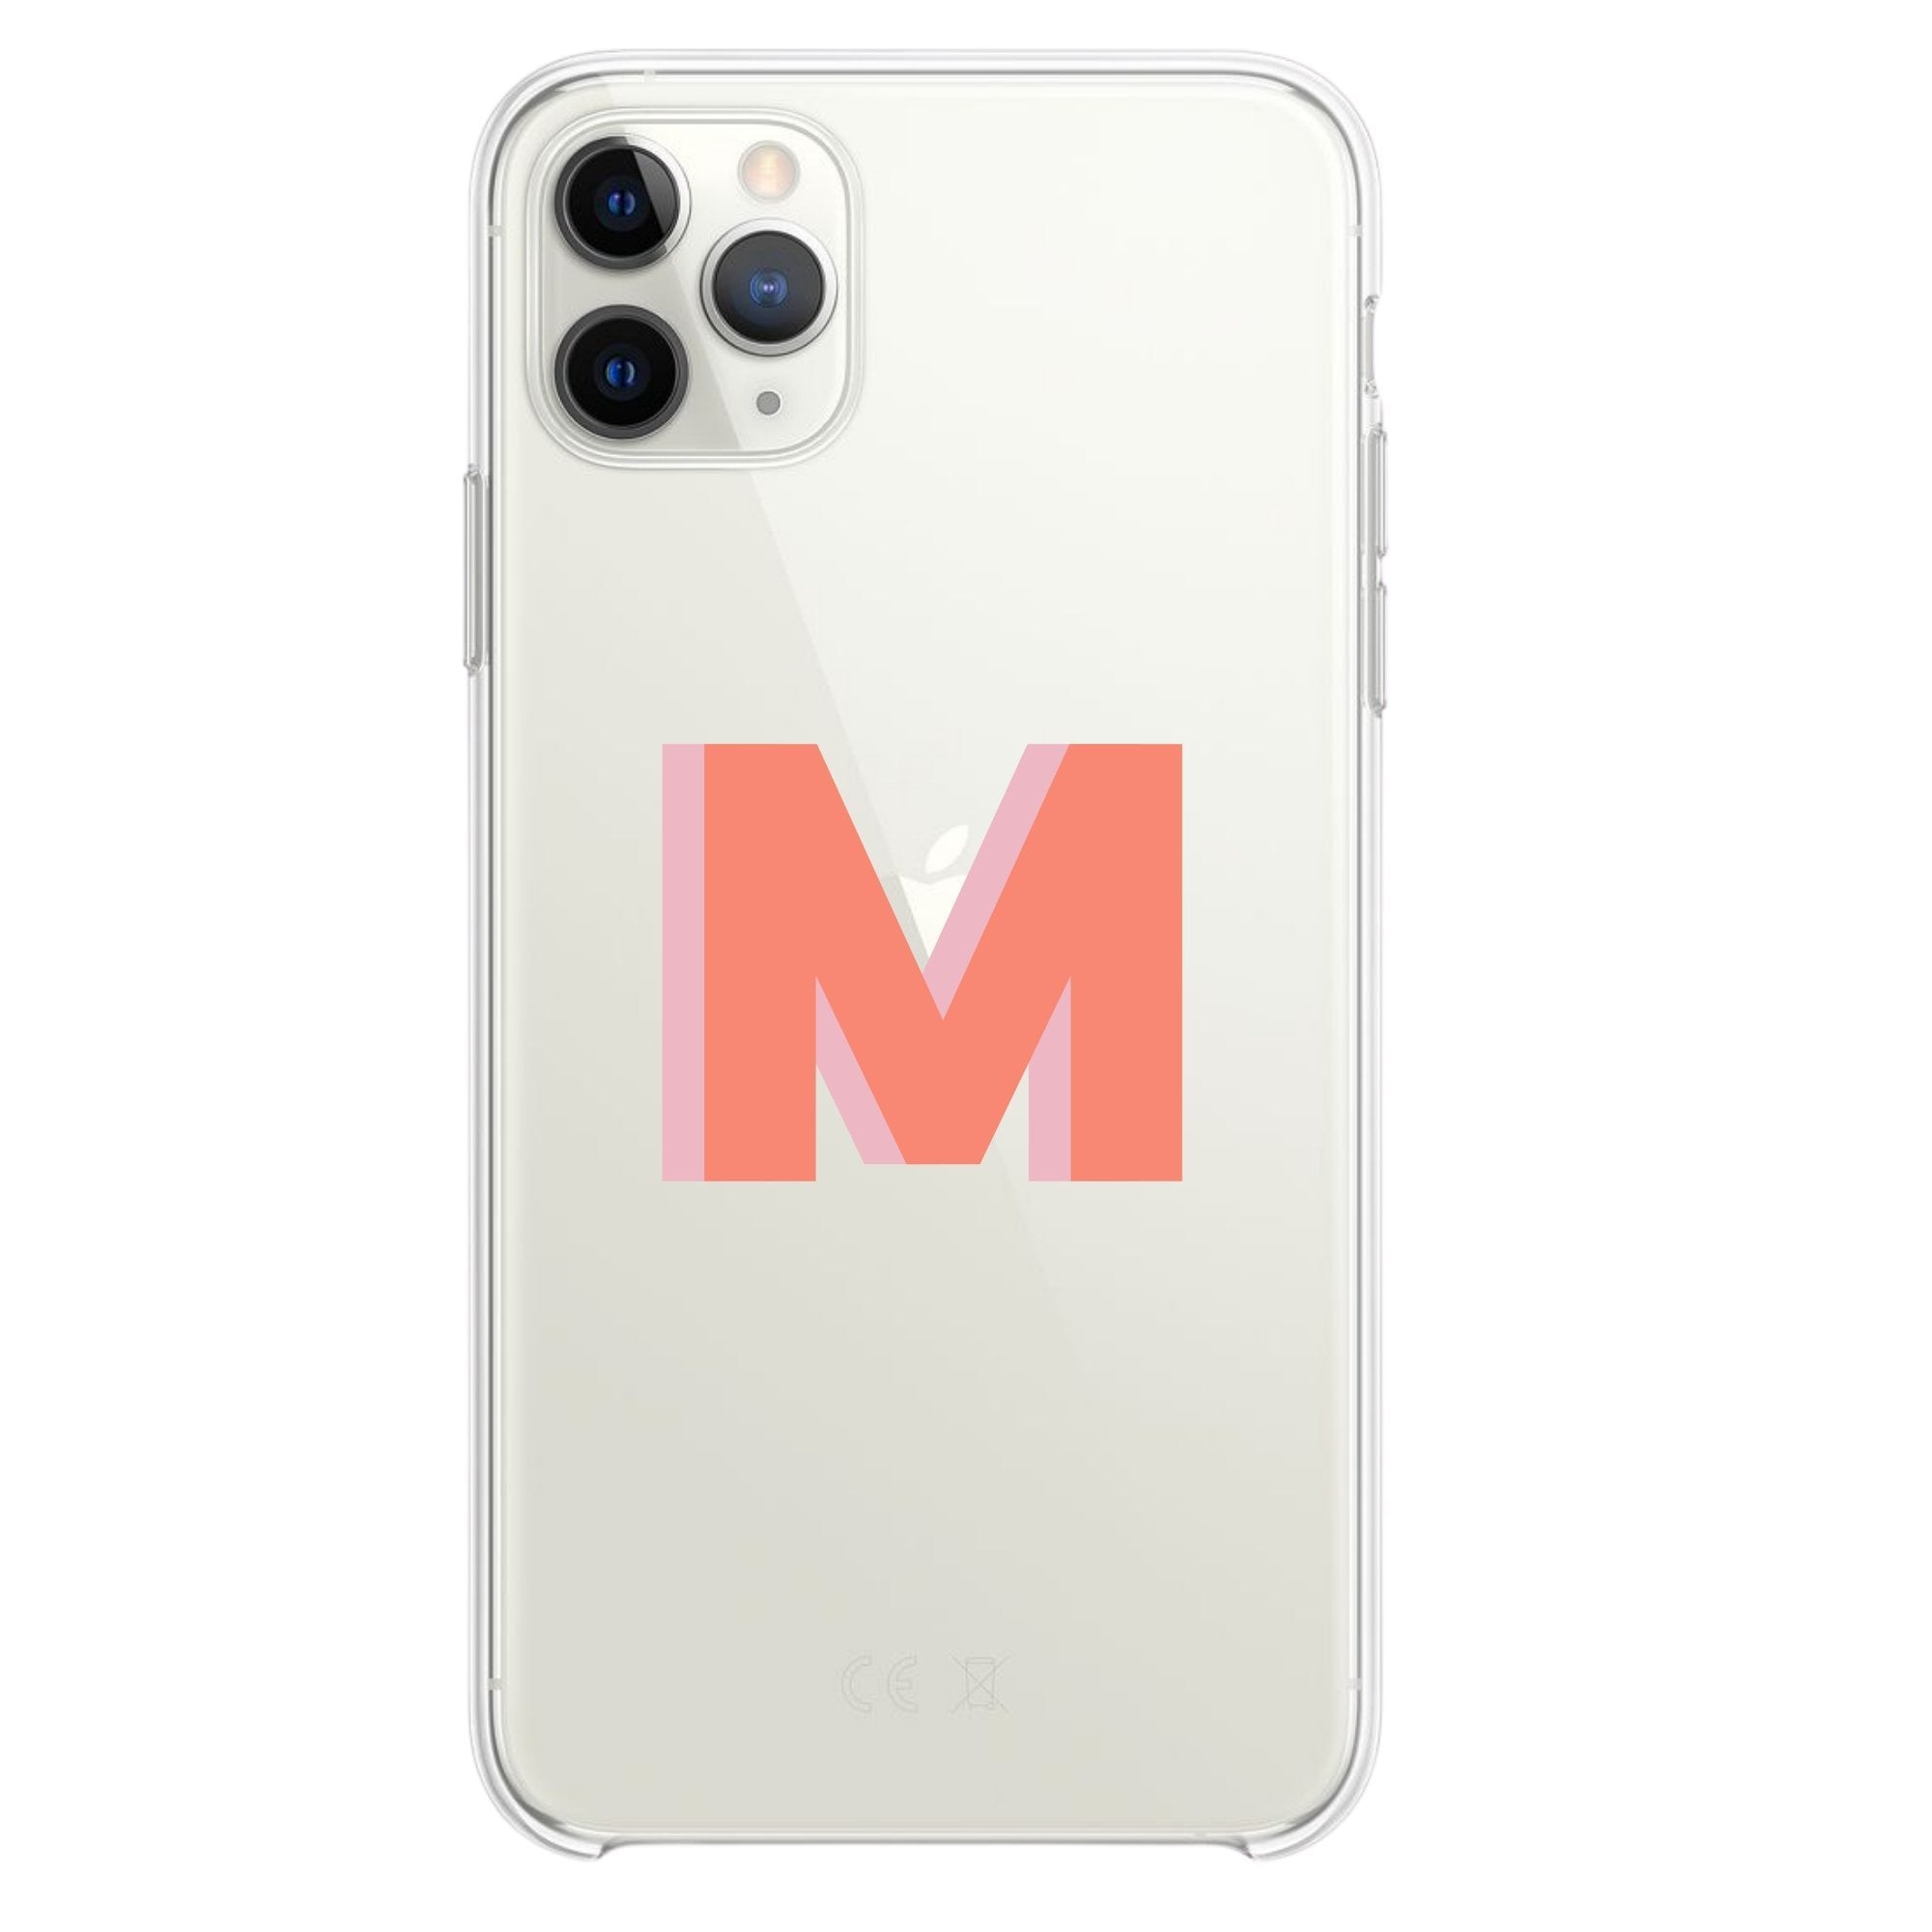 A clear phone case with a customizable area on the back